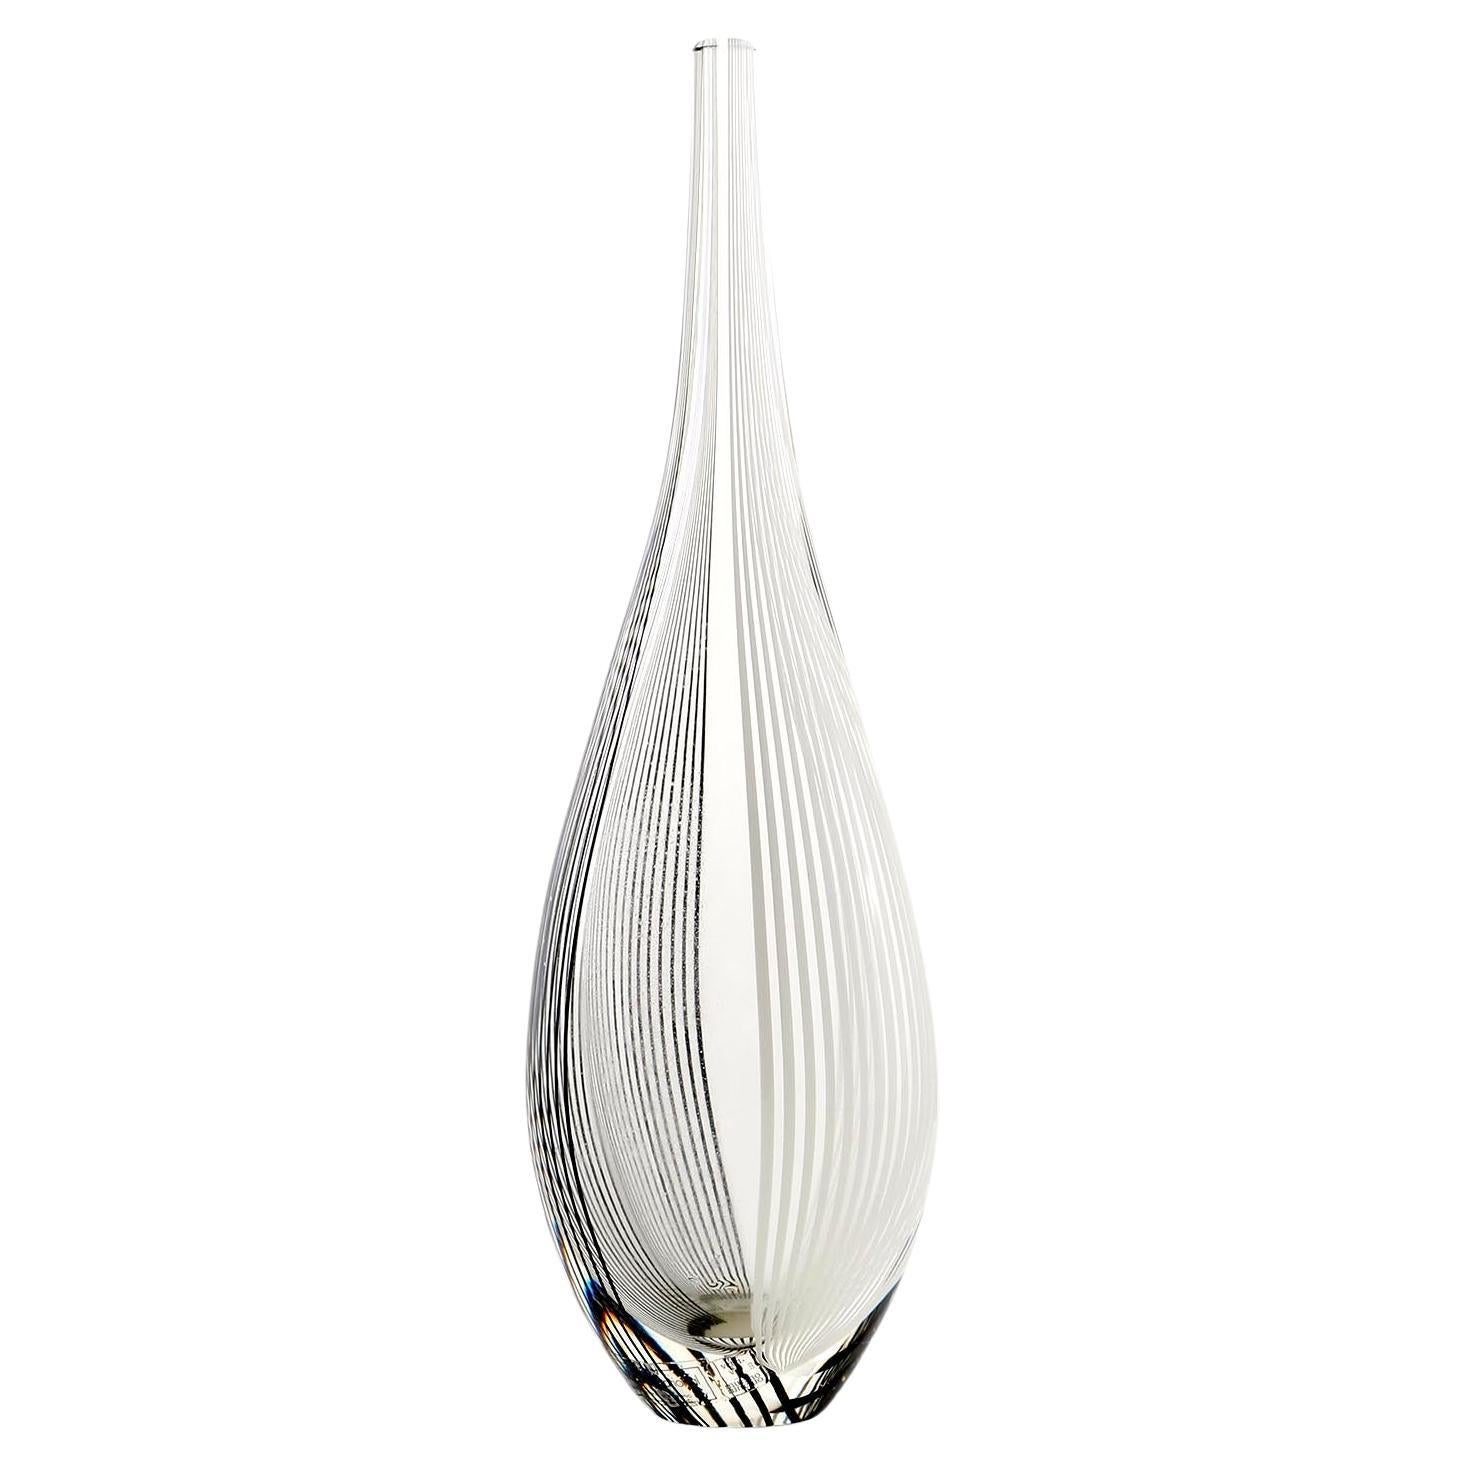 A gorgeous Italian glass vase by Lino Tagliapietra for Effetre International, Murano, 1986.
Clear glass with black and white strips.
The vase still has an Effetre International label on it.
It is also graven at the bottom with Lino Tagliapietra,